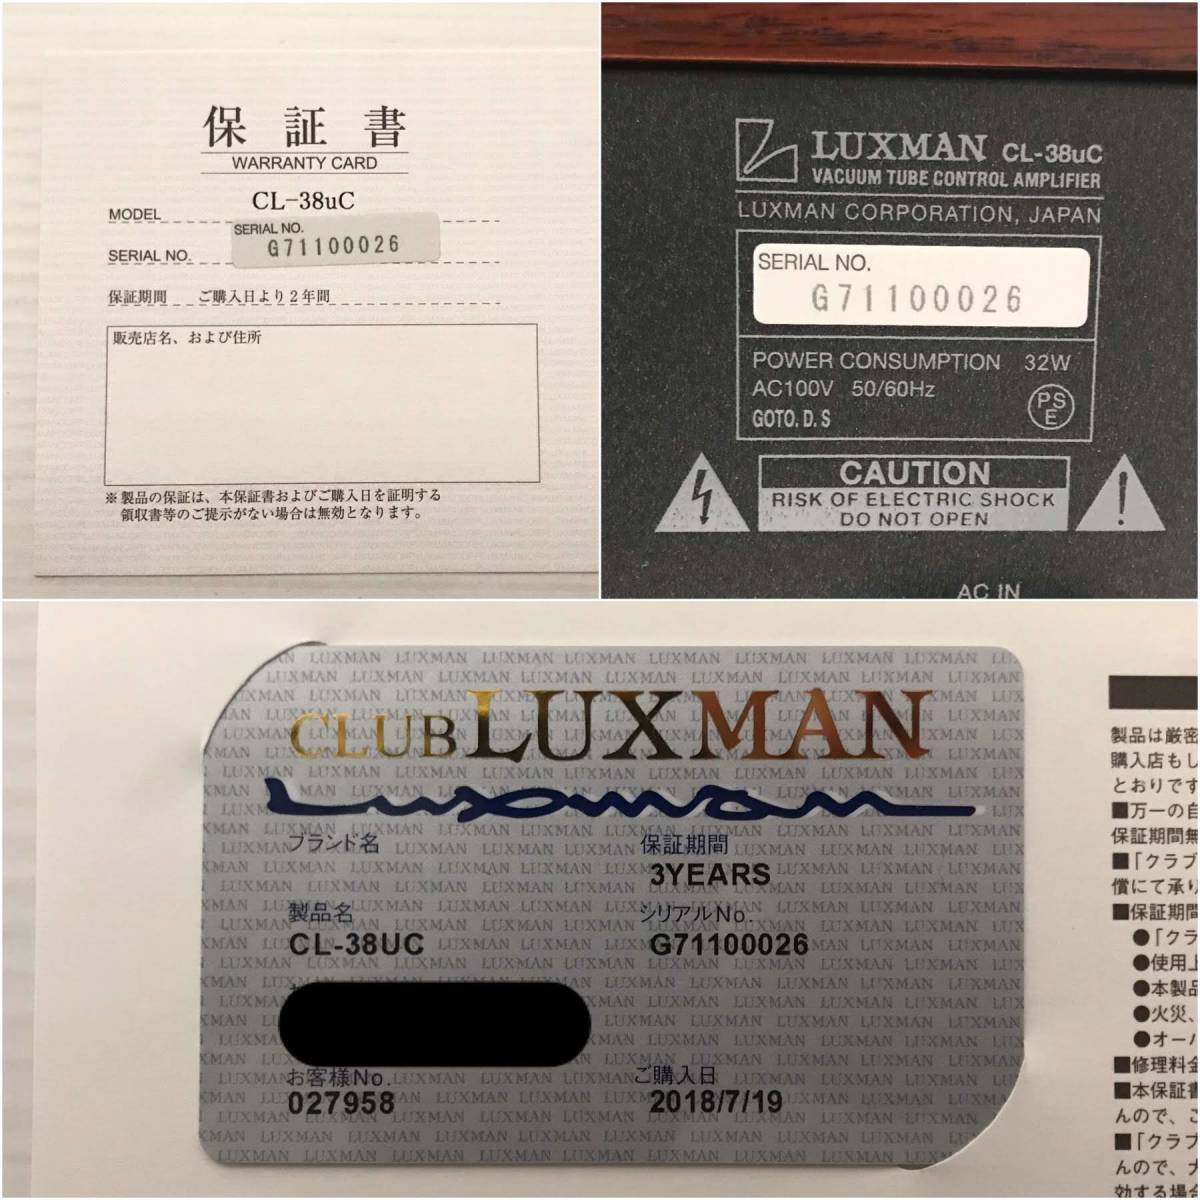  almost new goods LUXMAN Luxman CL-38uC vacuum tube control amplifier 2017 year made 21 year 7 month till manufacturer guarantee equipped 